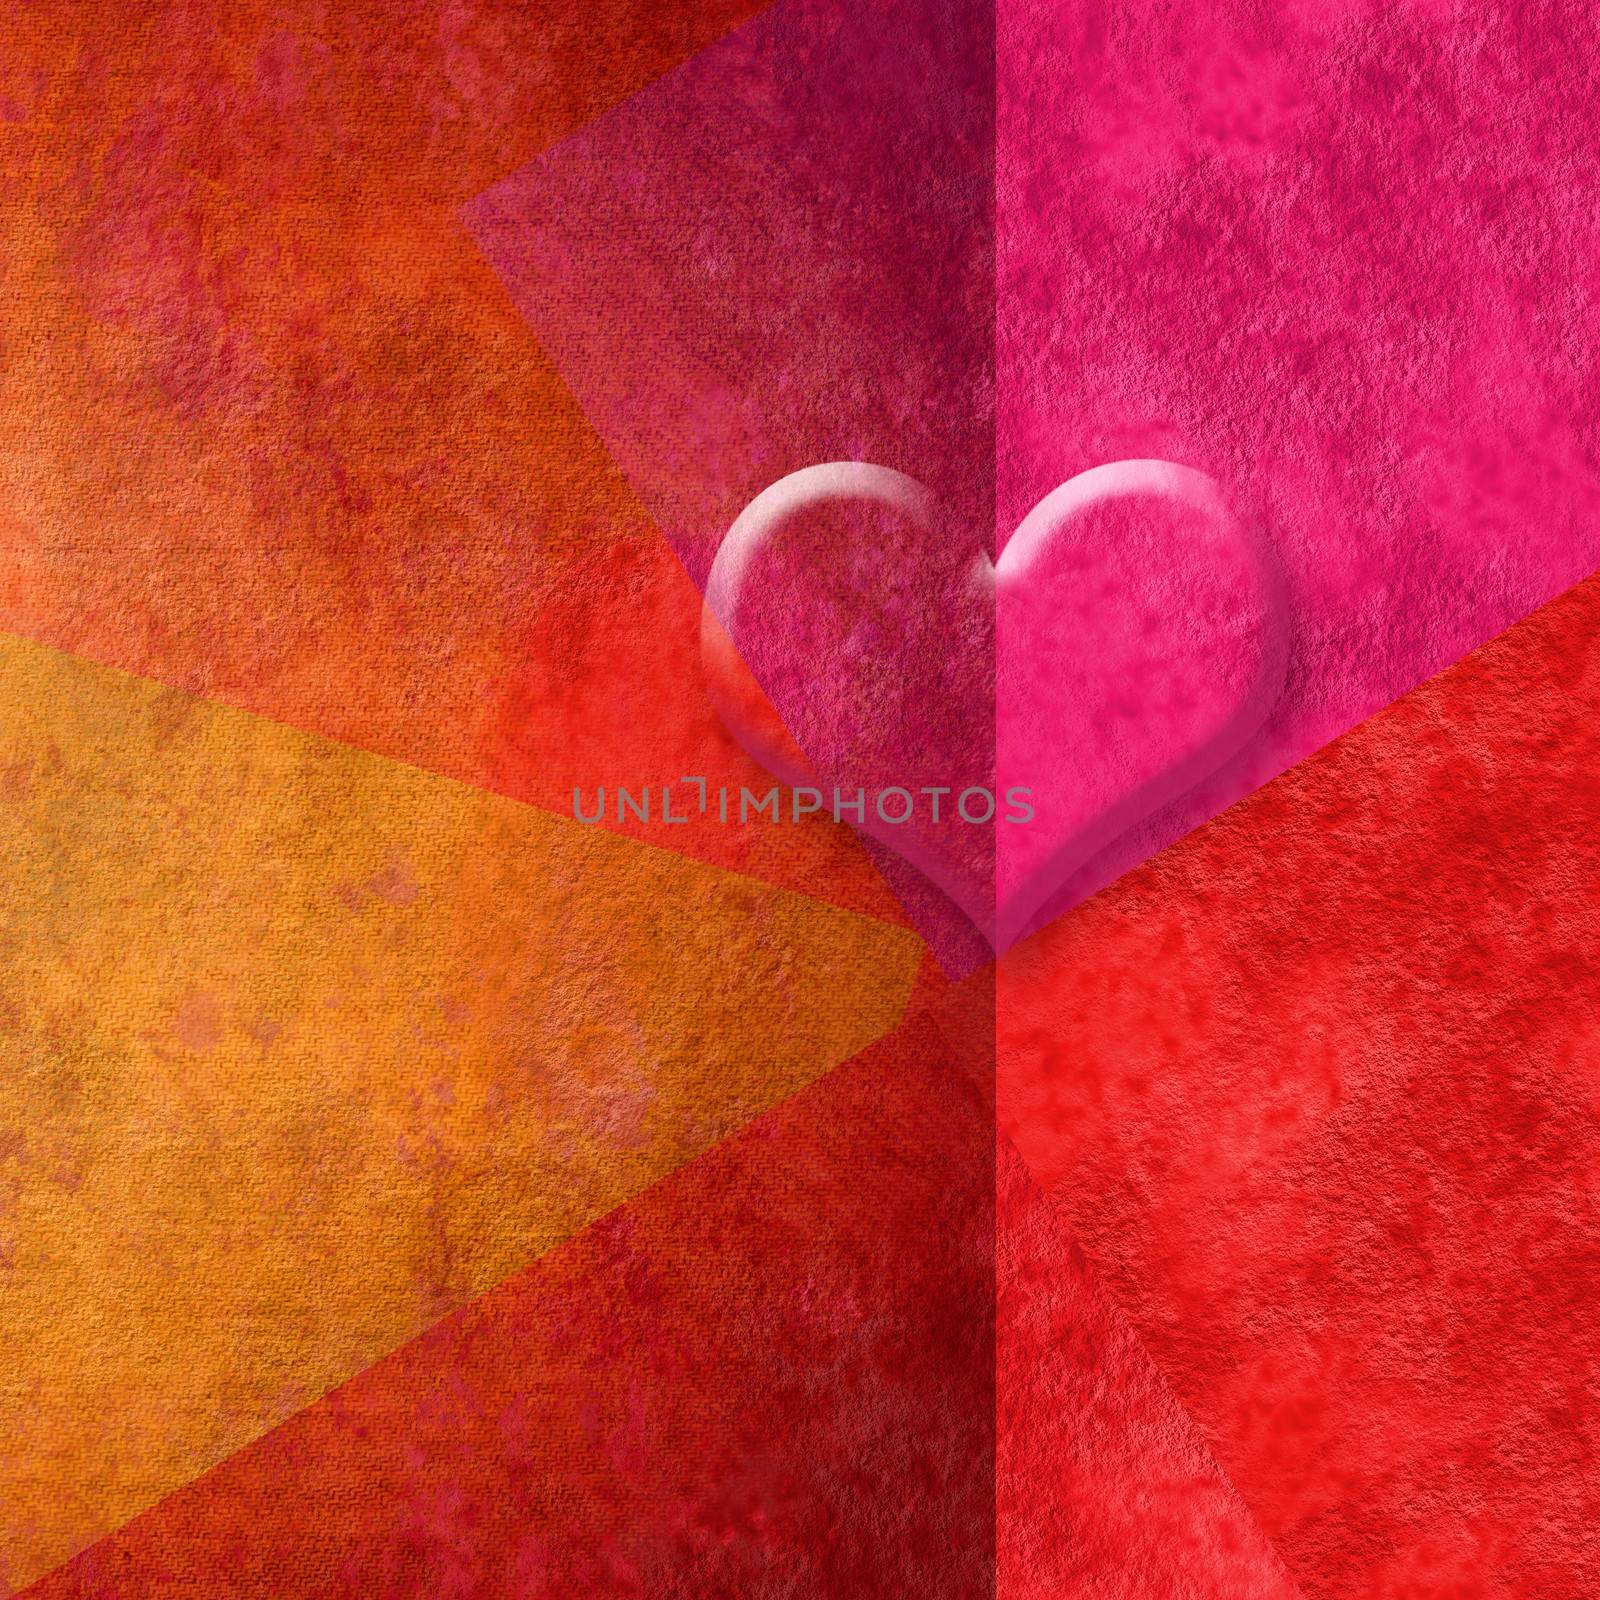 red background valentines card heart in red tones with copy espace for message